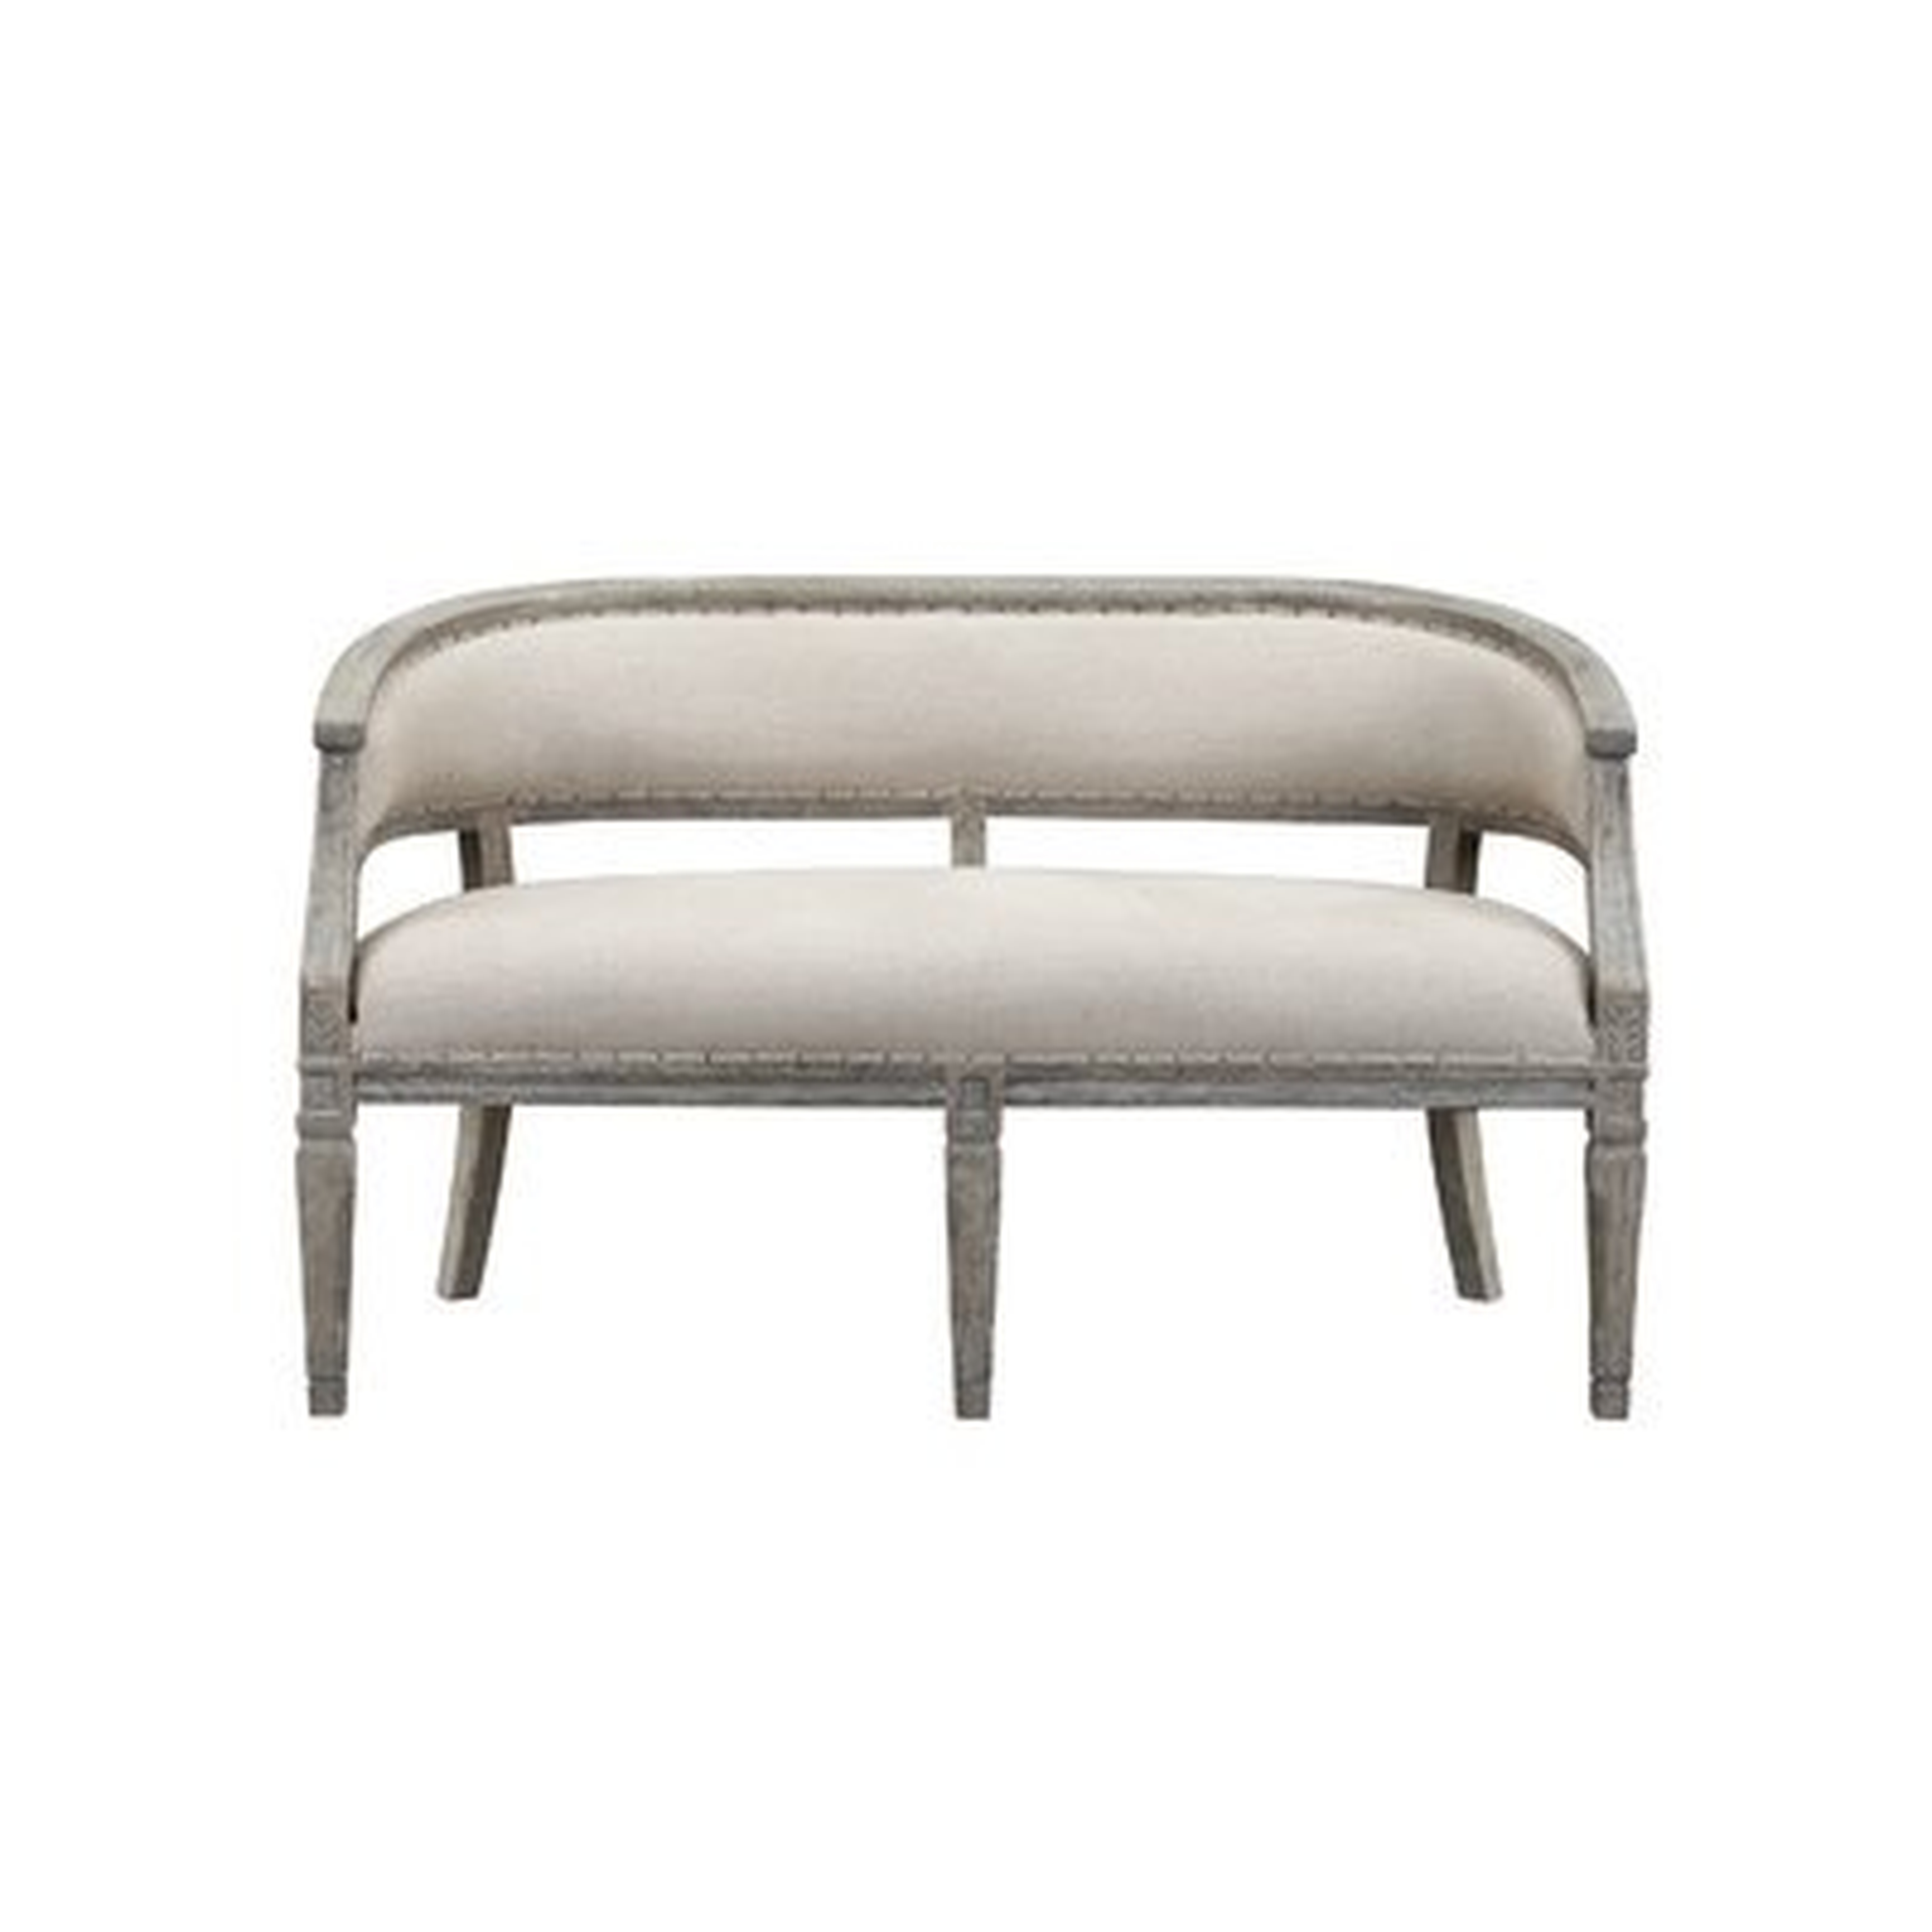 Maily Upholstered Bench - Wayfair